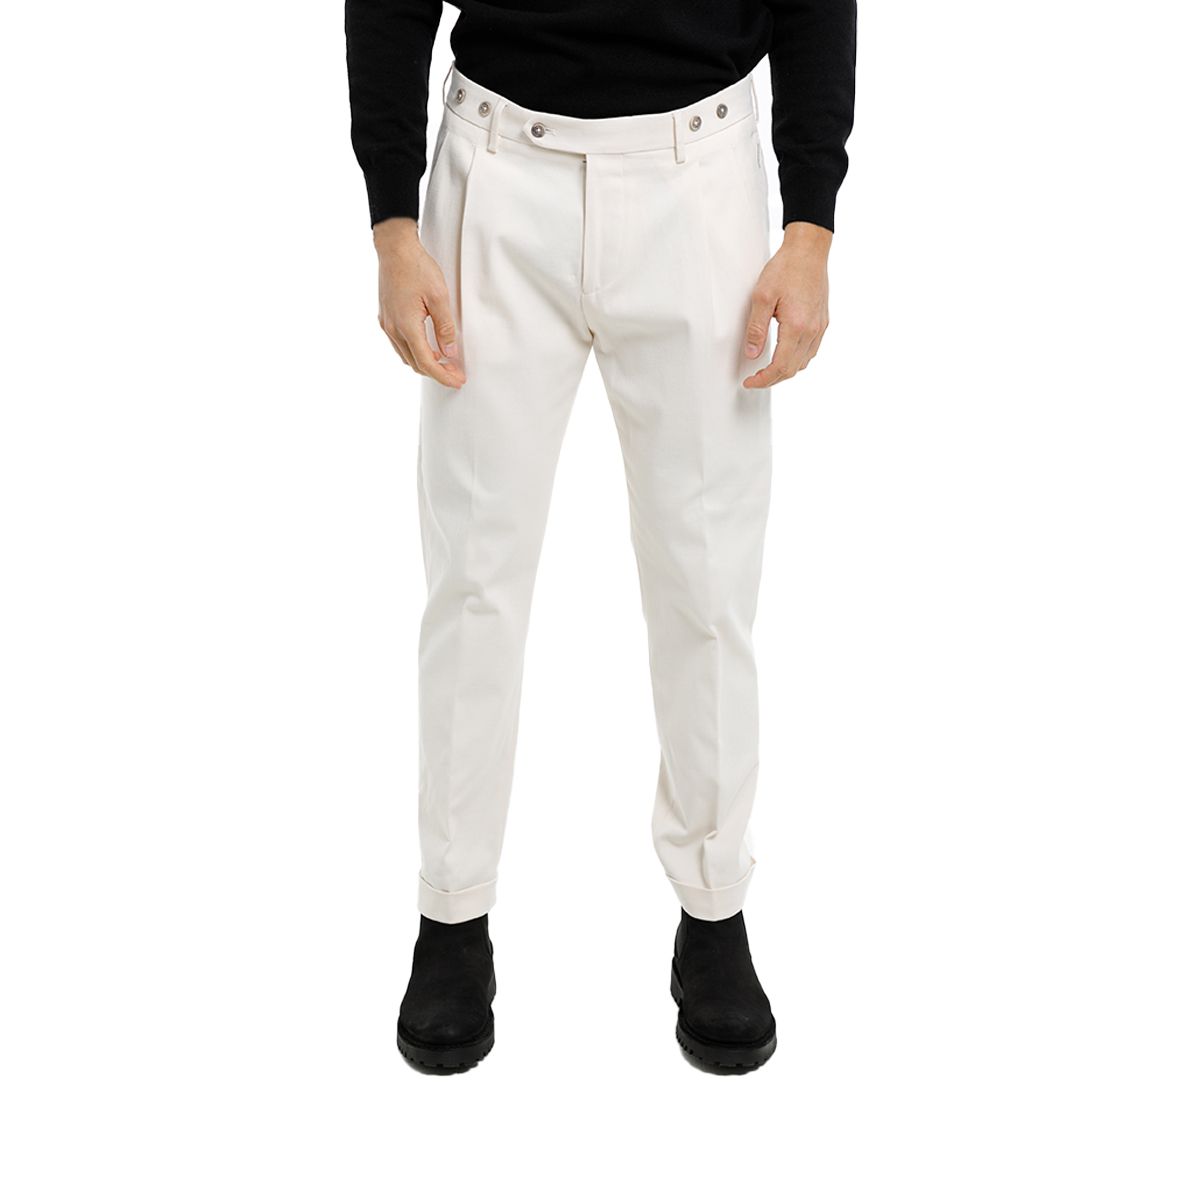 Barber White Trousers